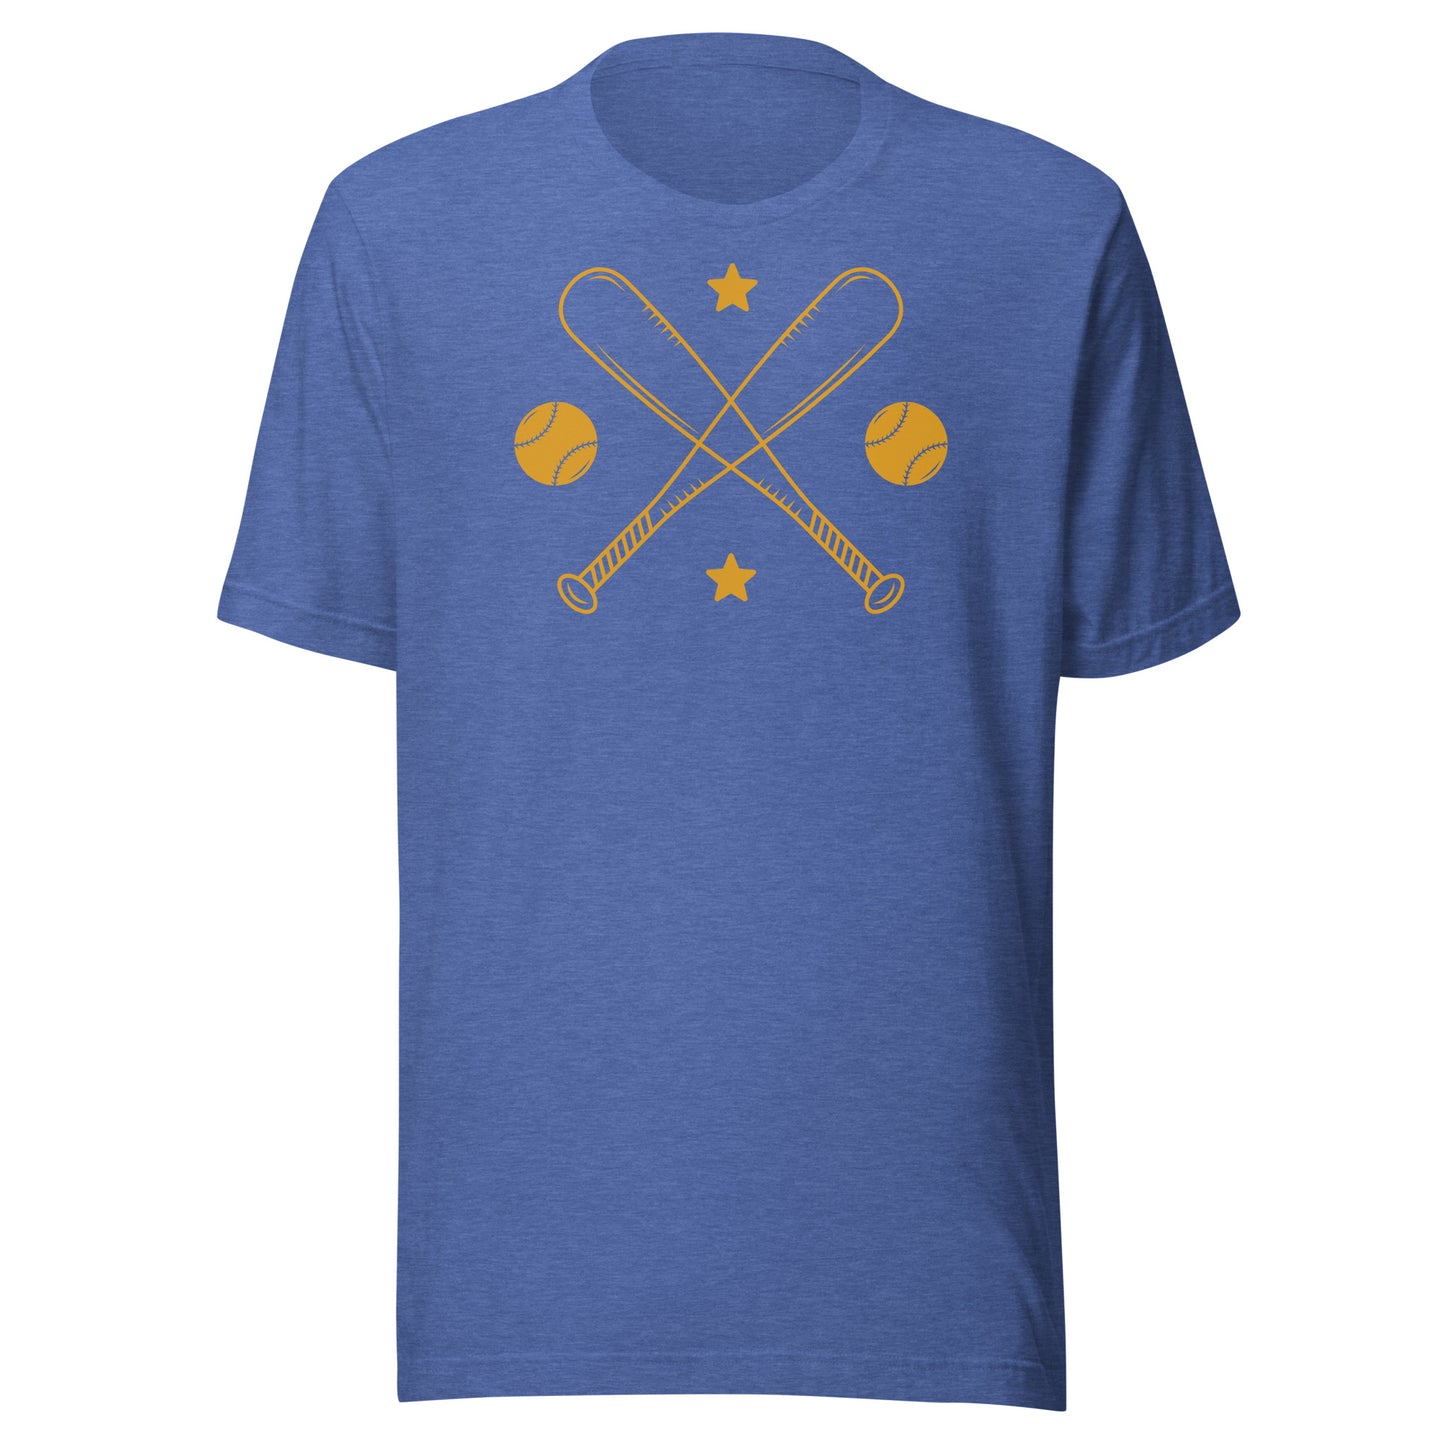 Baseball-Inspired T-Shirts for Fans and Players Alike!